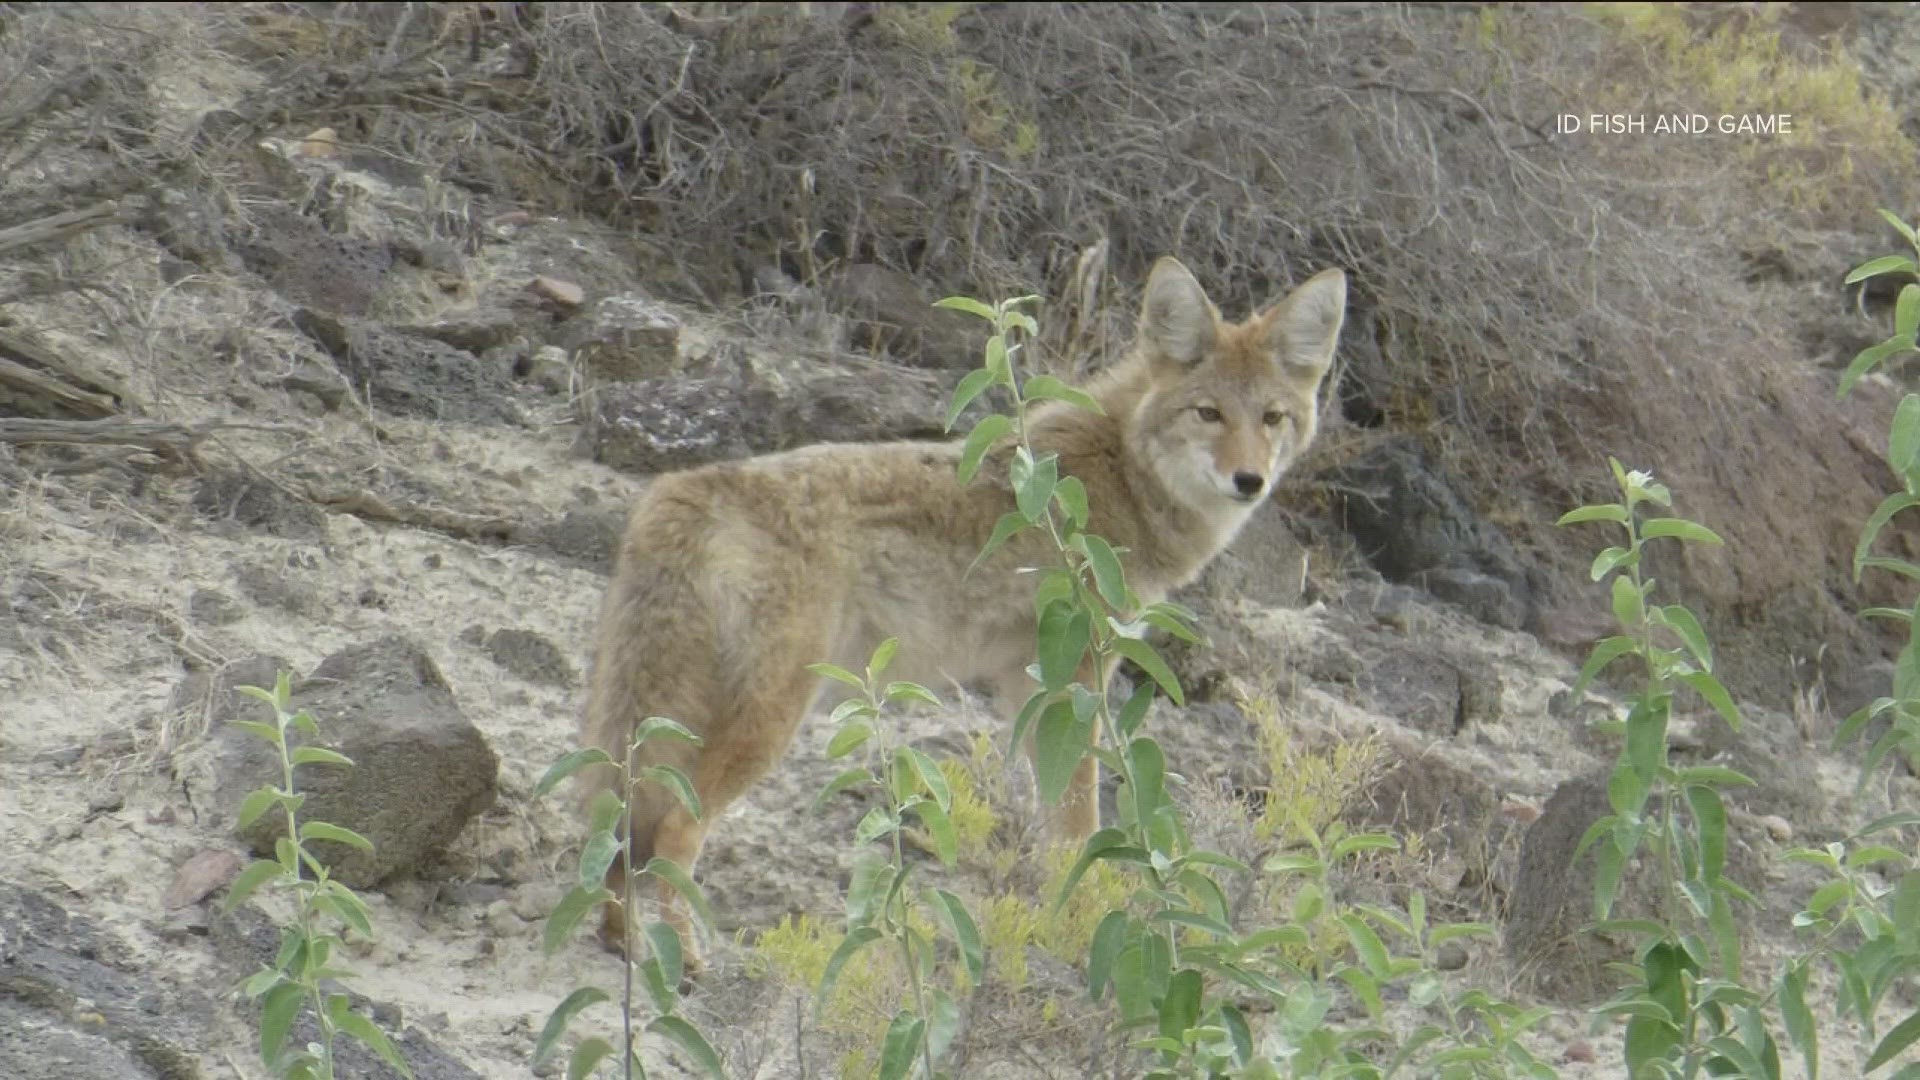 "Our advice is to avoid known areas with coyotes and foxes and keep your dogs on-leash when in these areas," Regional Wildlife Manager Mike McDonald said.